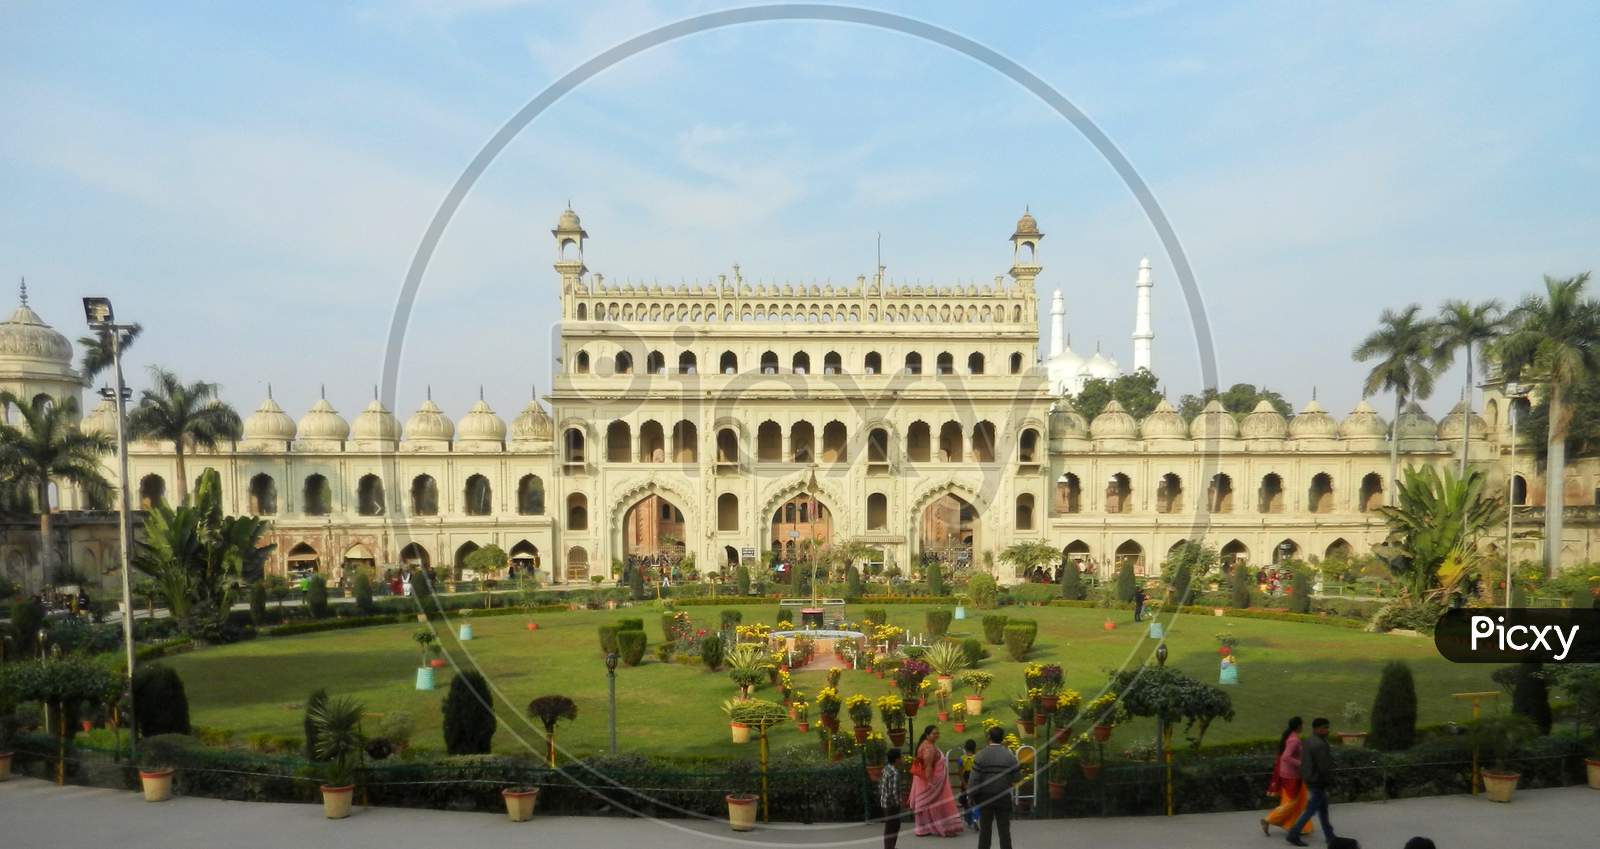 Old Mughal monument in lucknow,India